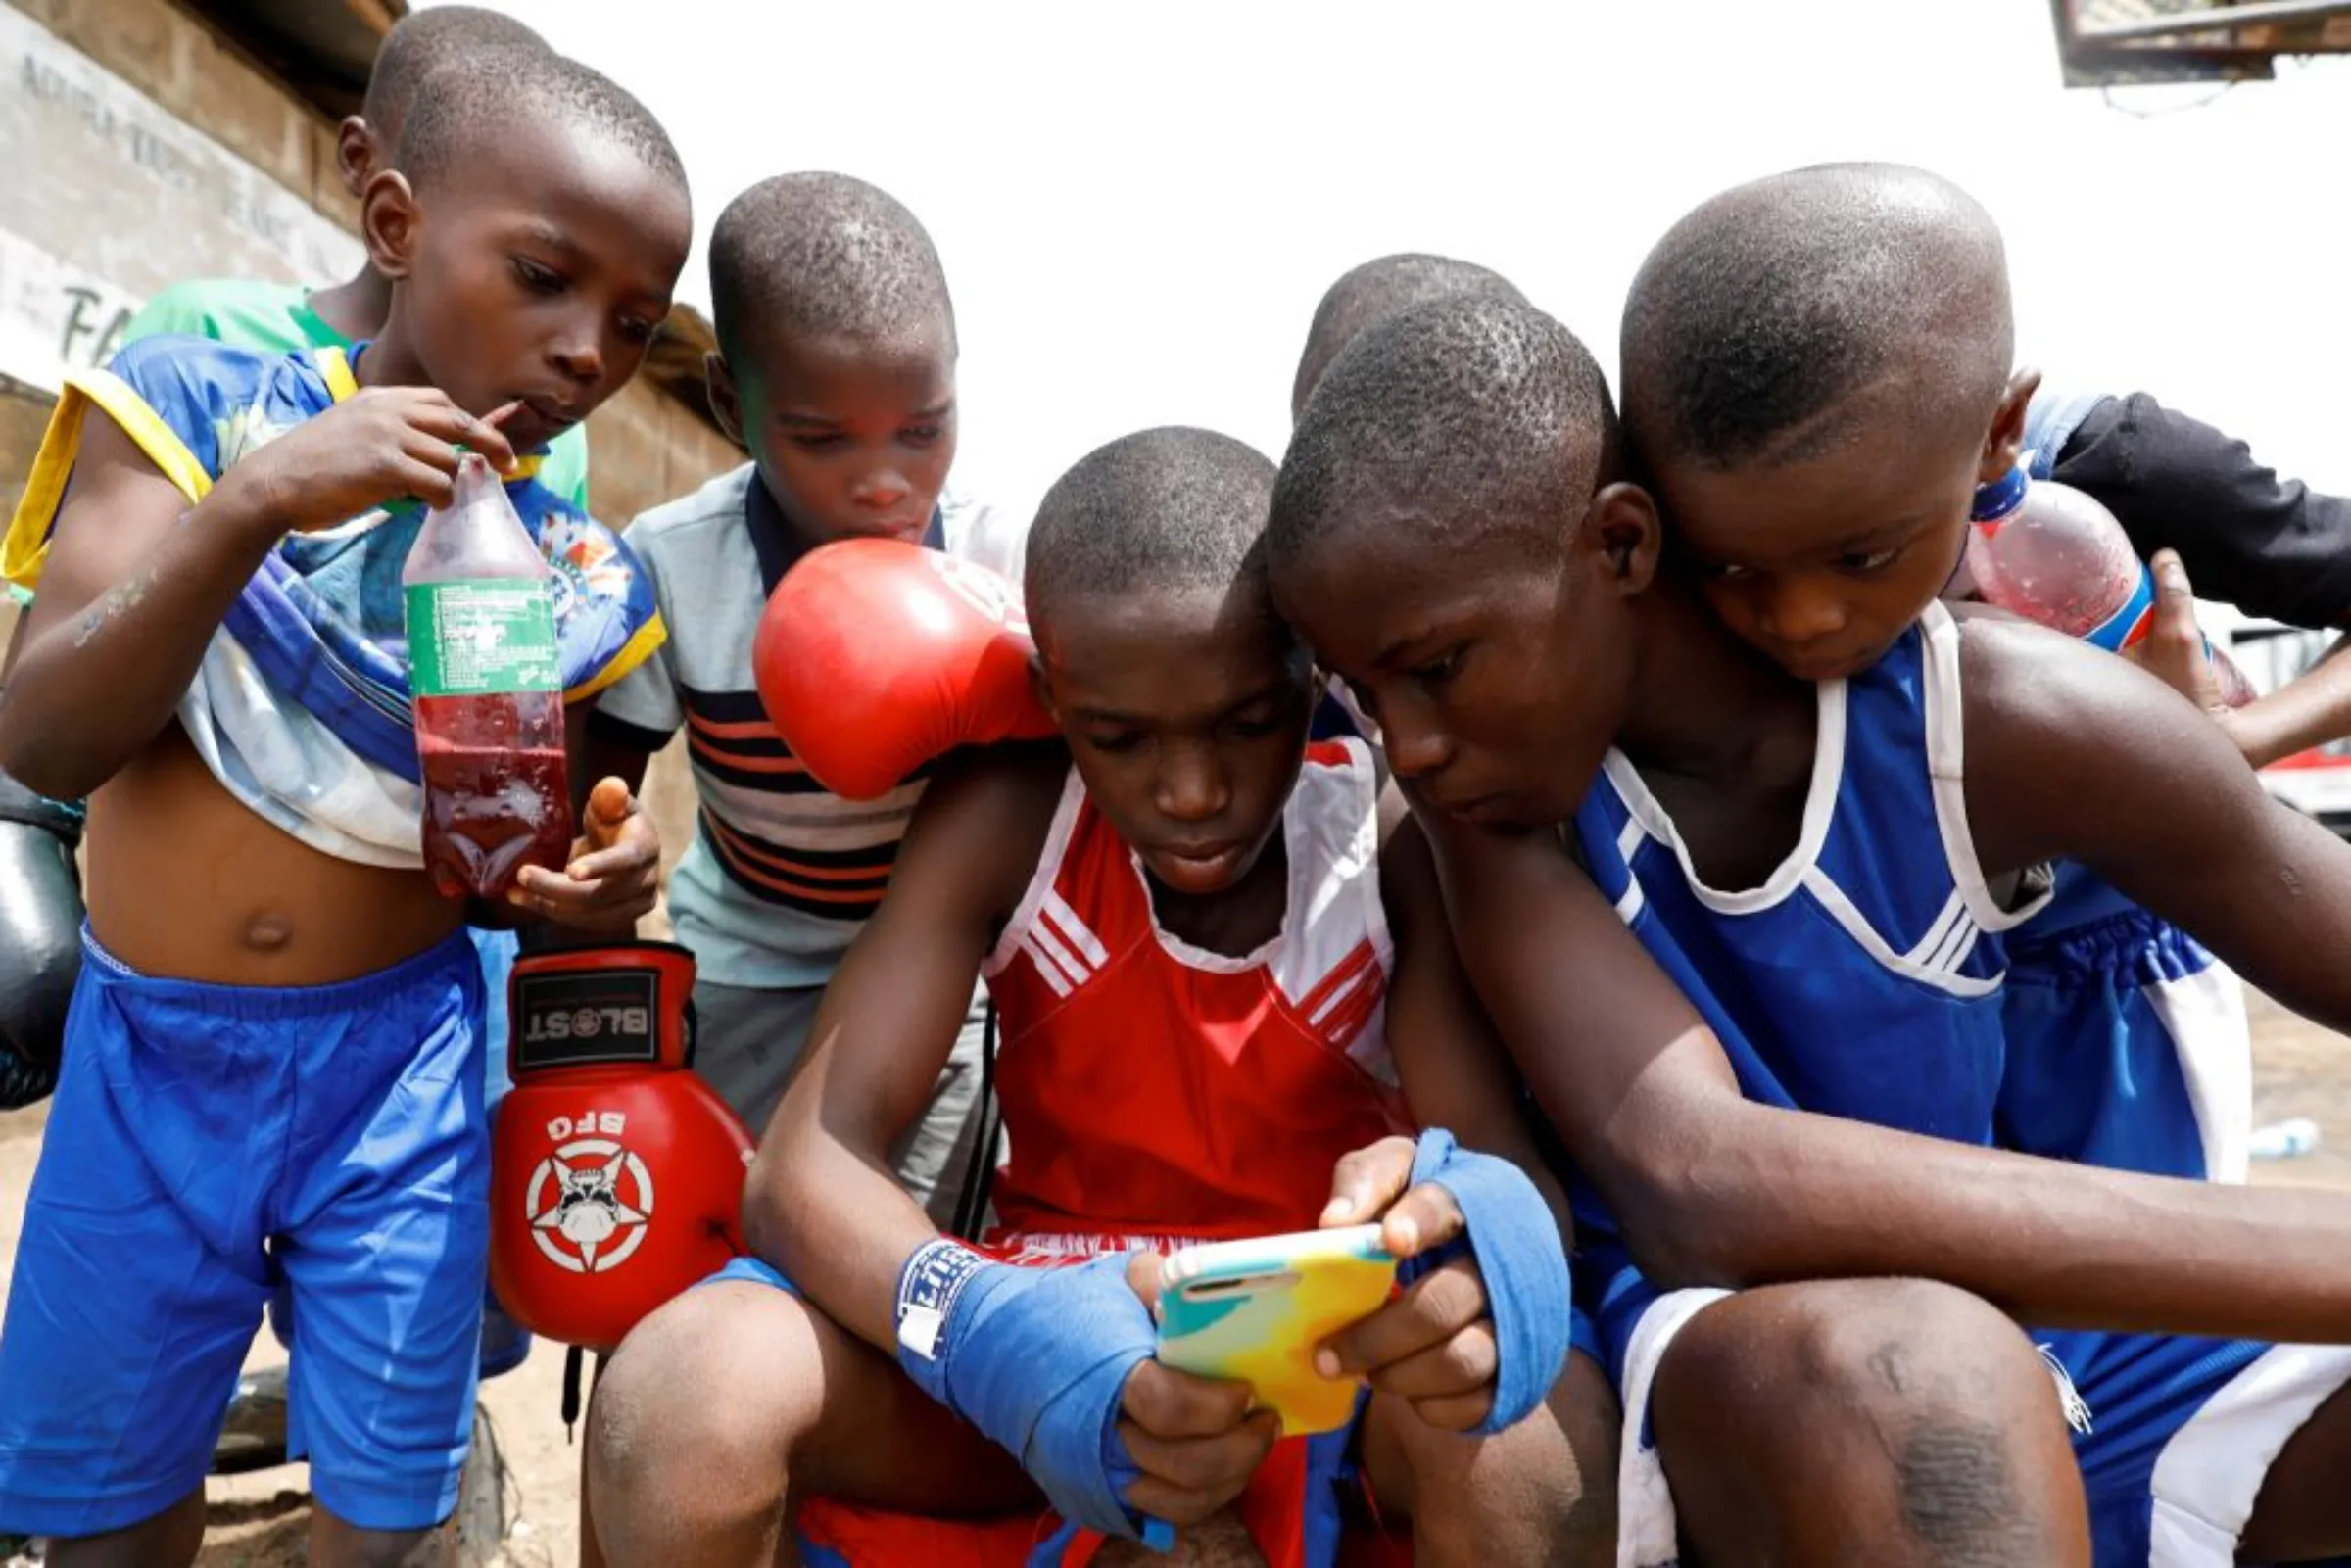 Kid boxers watch a video on a mobile phone together after a training session at the boxing gym in Adura playground, in Lagos, Nigeria June 5, 2021